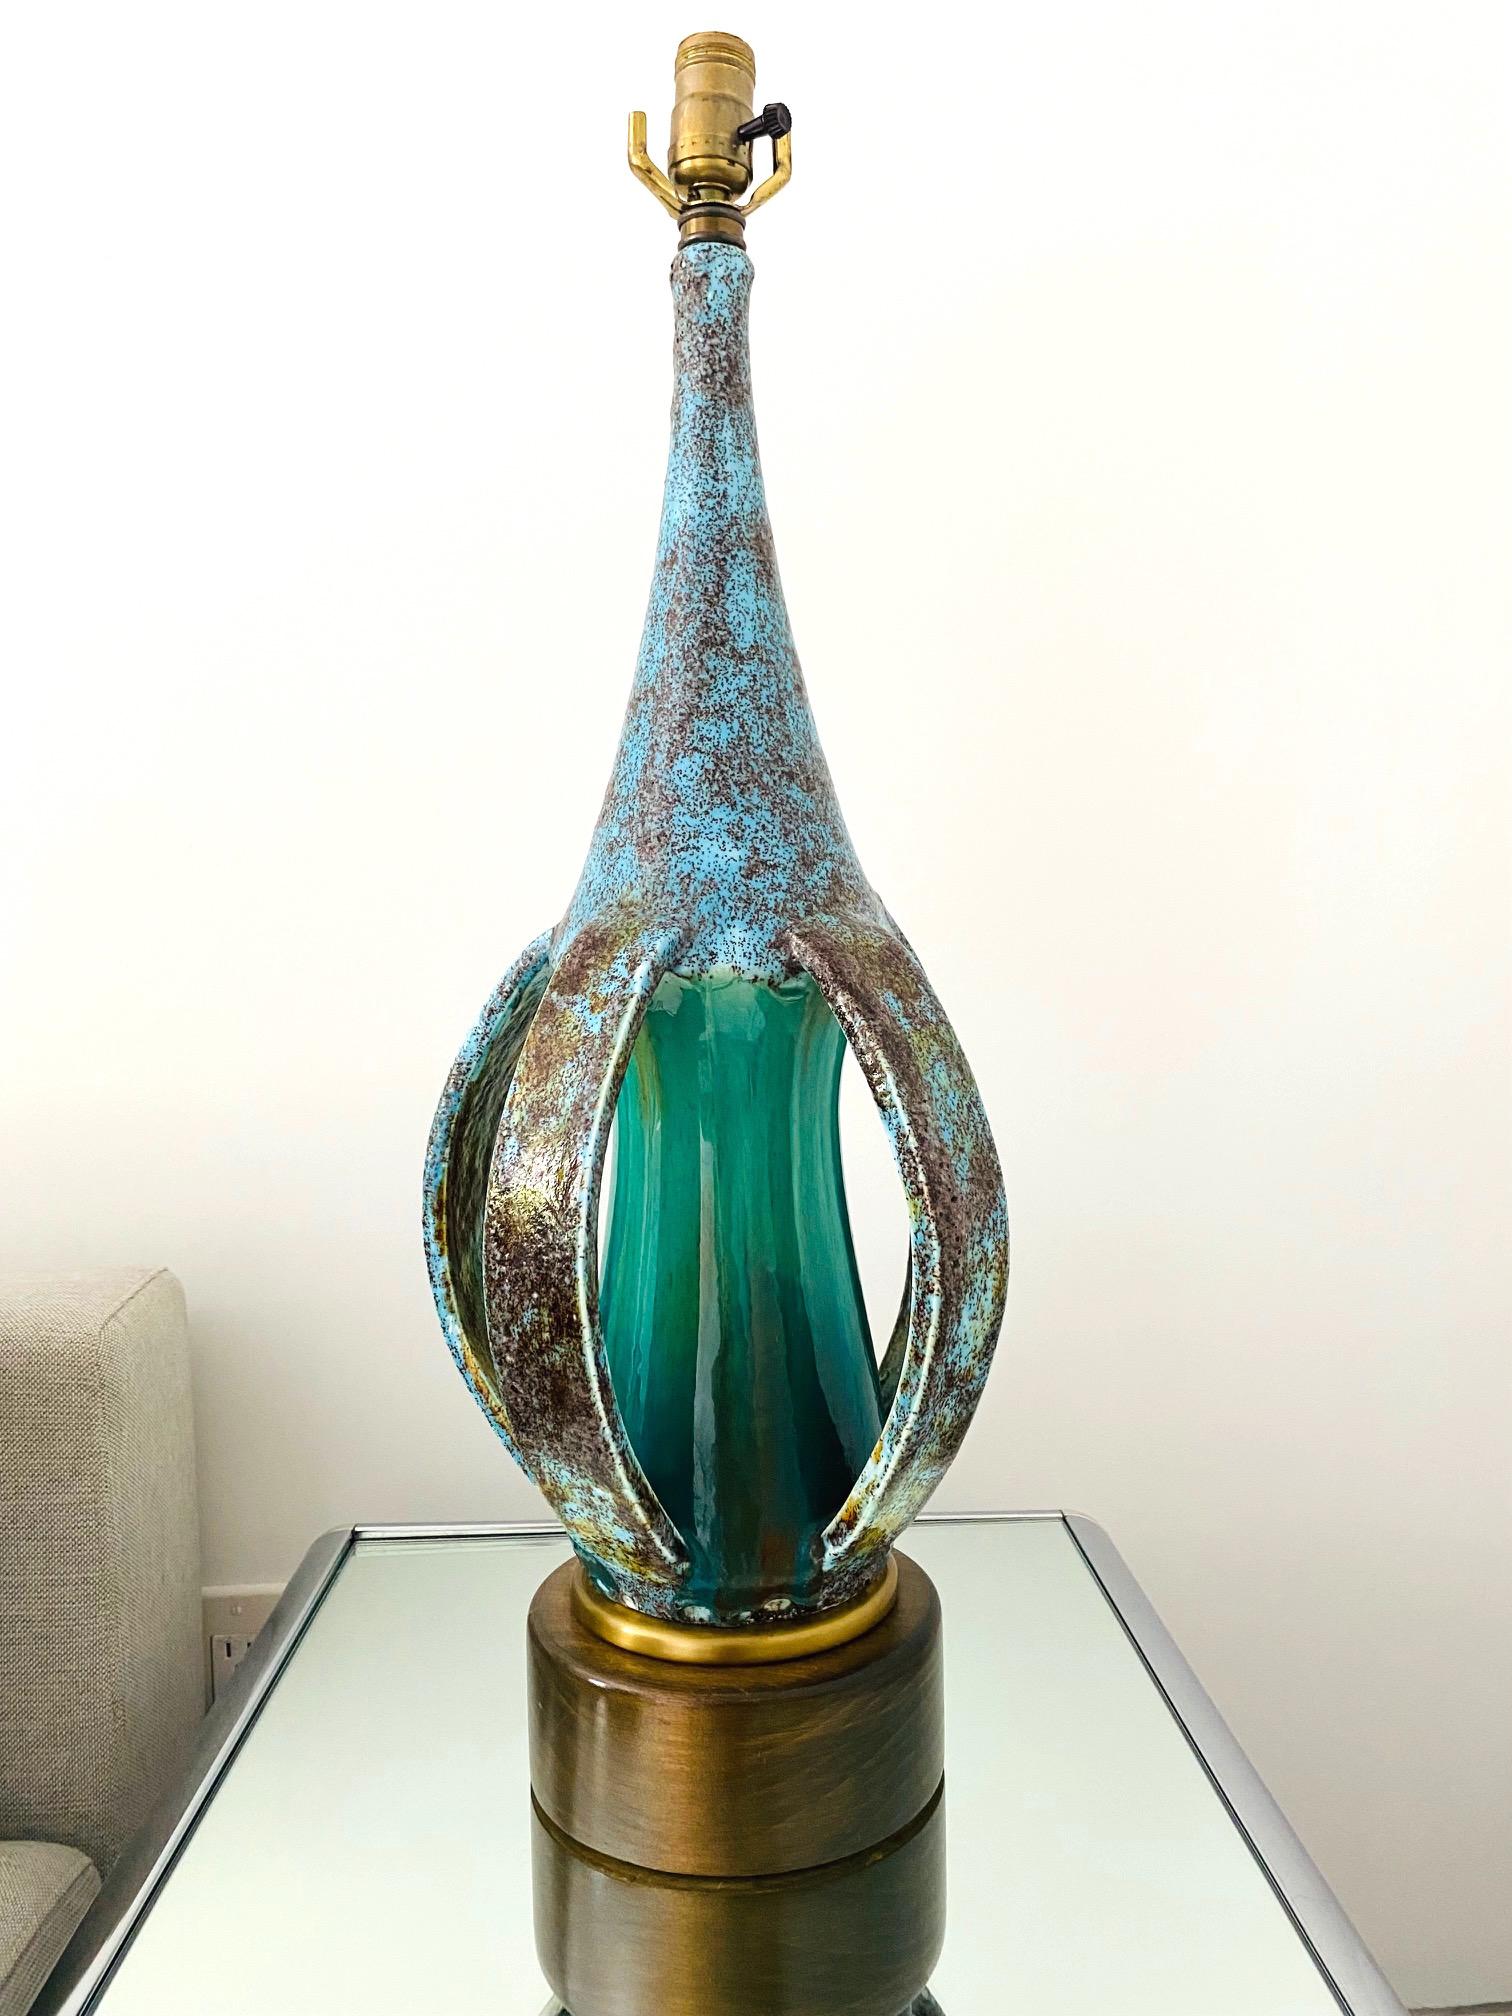 Danish Mid-Century Modern Sculptural Pottery Lamp in Turquoise & Blue, Denmark C. 1960s For Sale